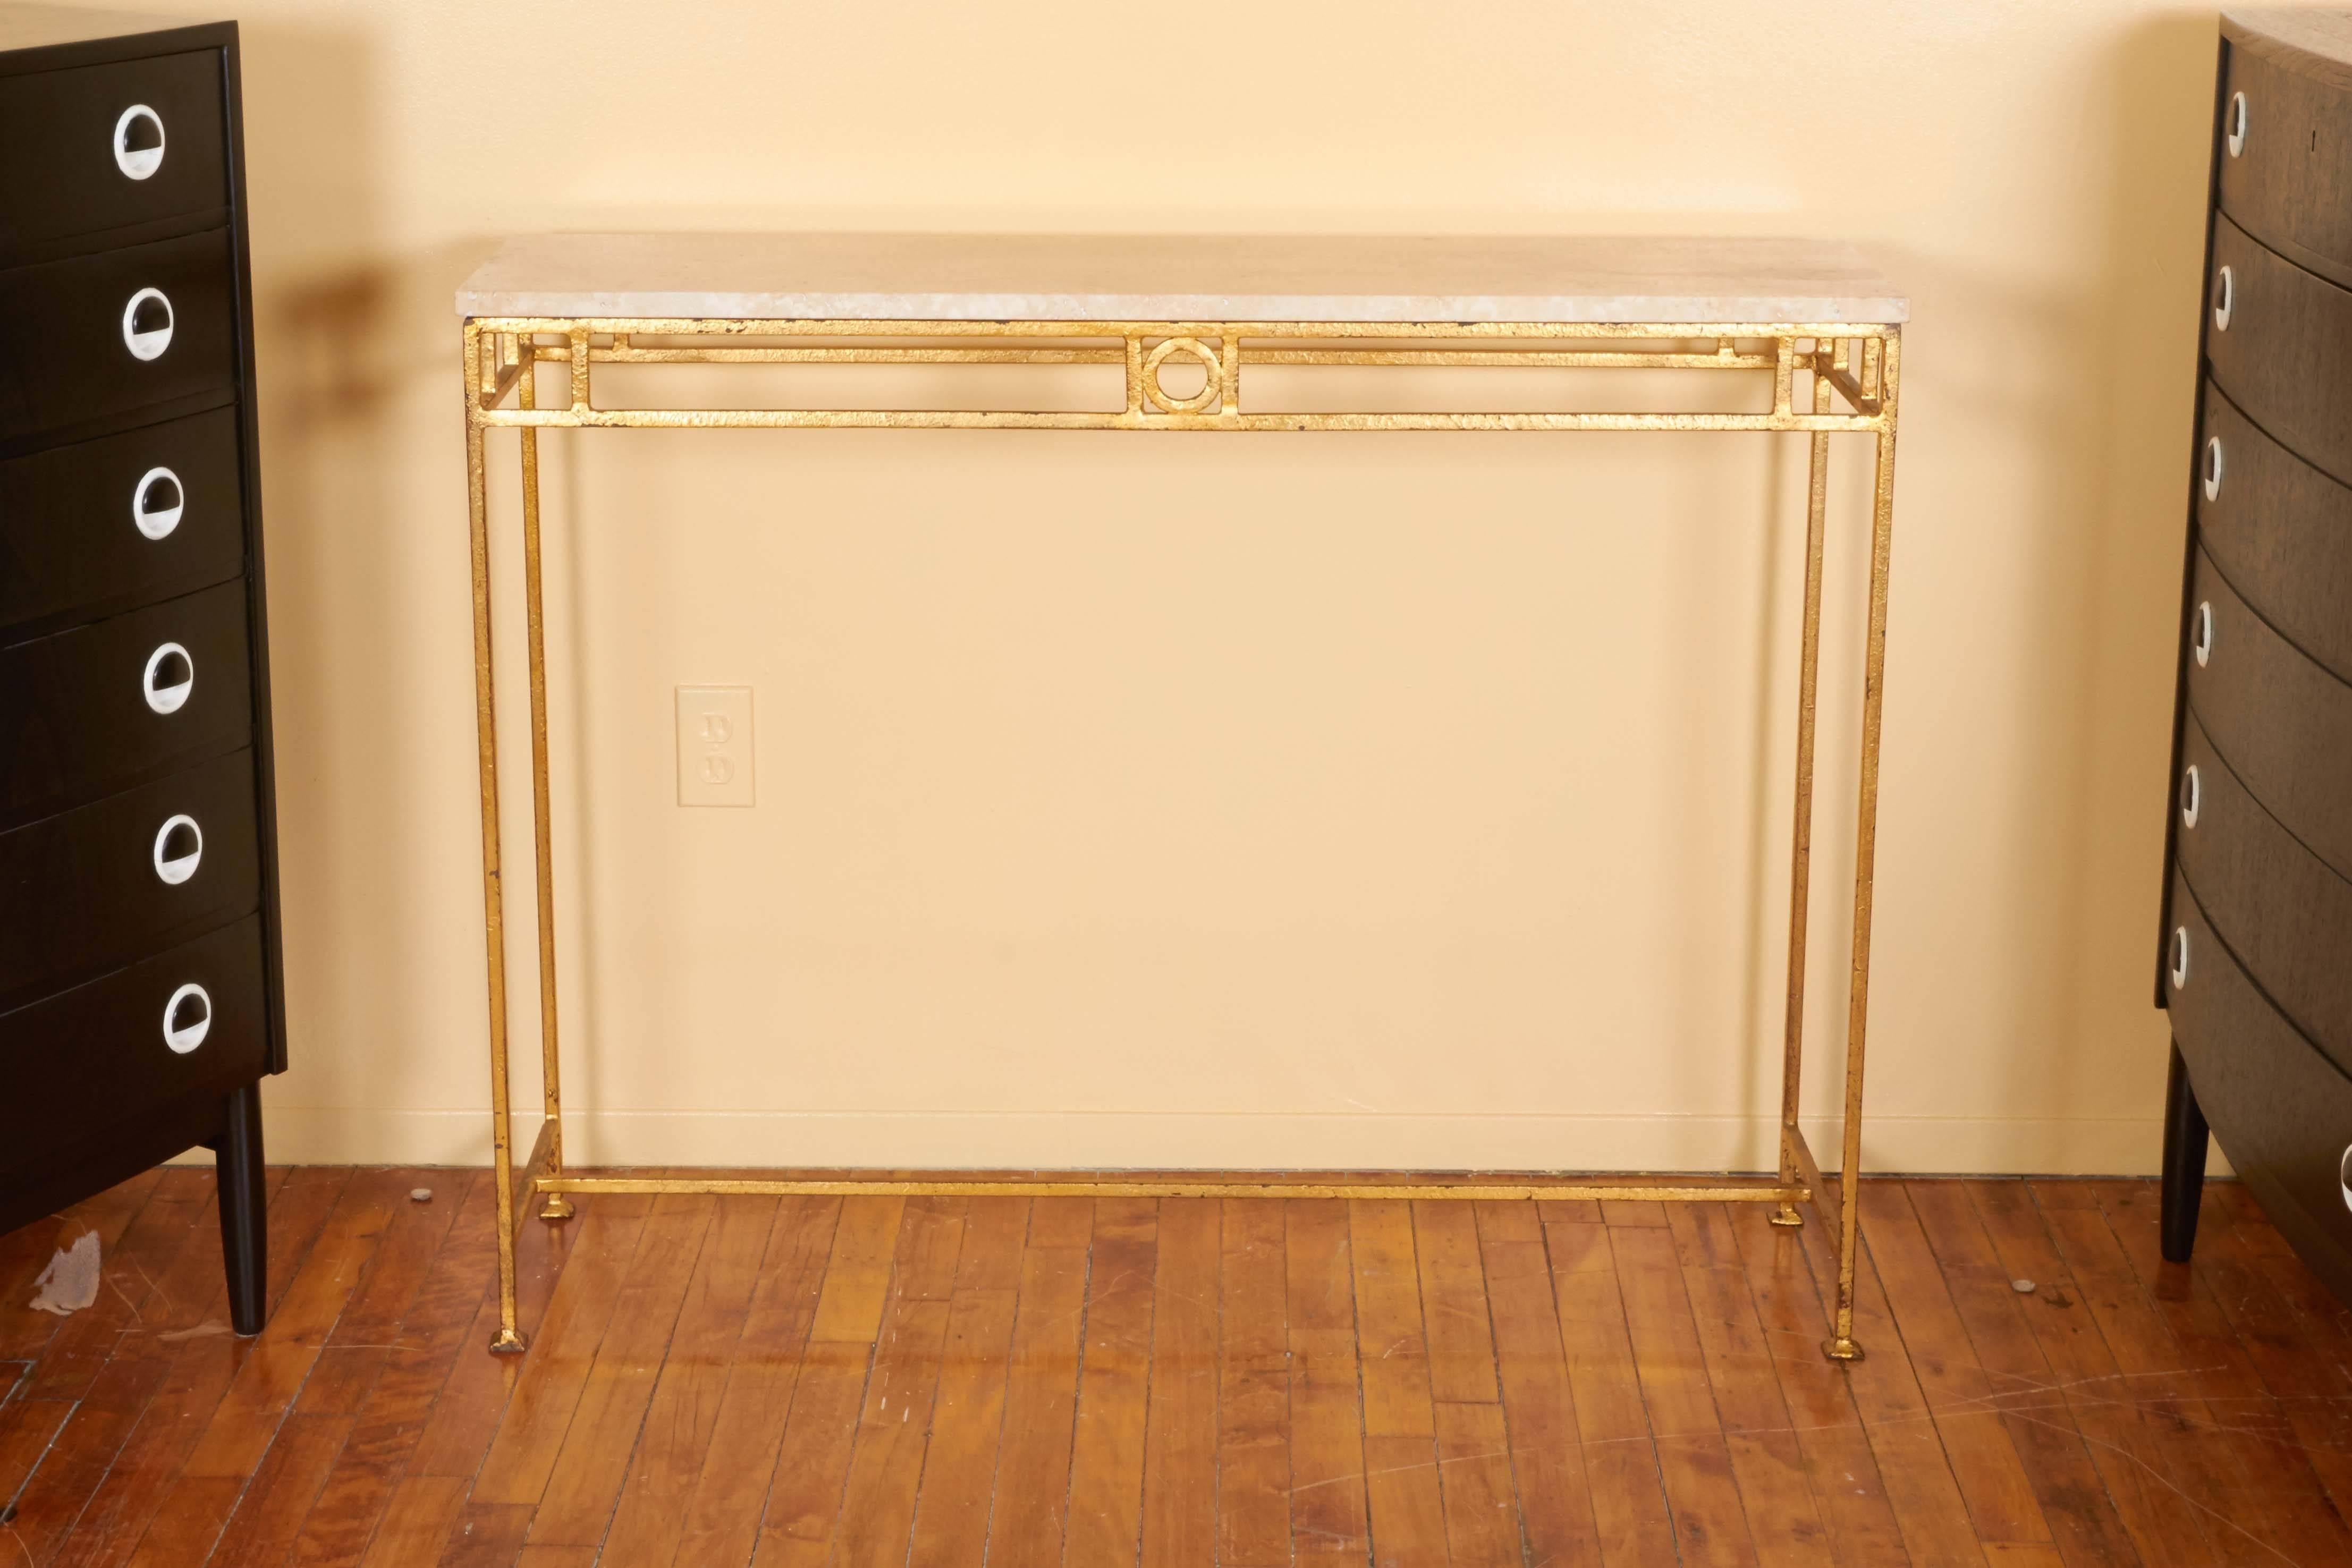 A French console table, manufactured circa 1950s, with travertine top on linear metal base with gilt finish, detailed with geometric forms. Very good vintage condition, wear and minor loss of finish consistent with age and use.

10797